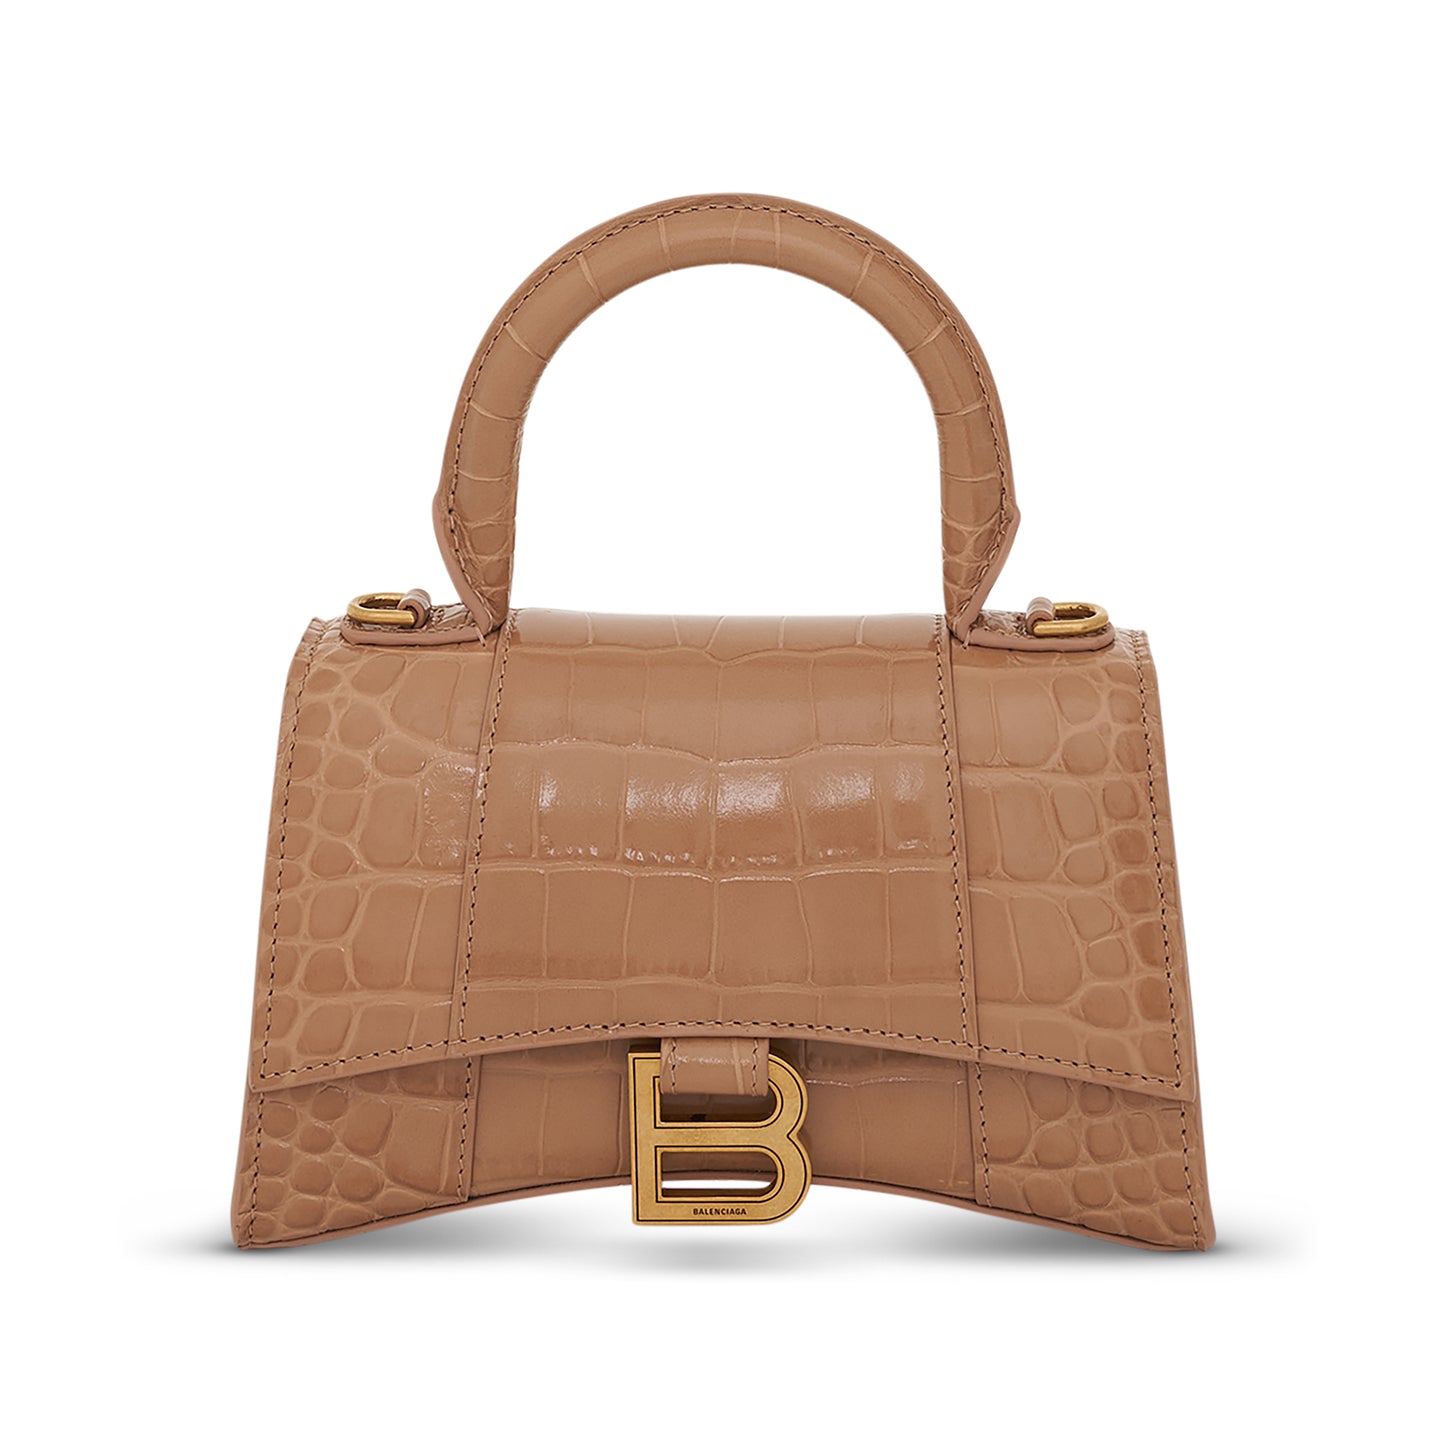 Hourglass XS Croco Embossed Bag in Beige with Gold Plague